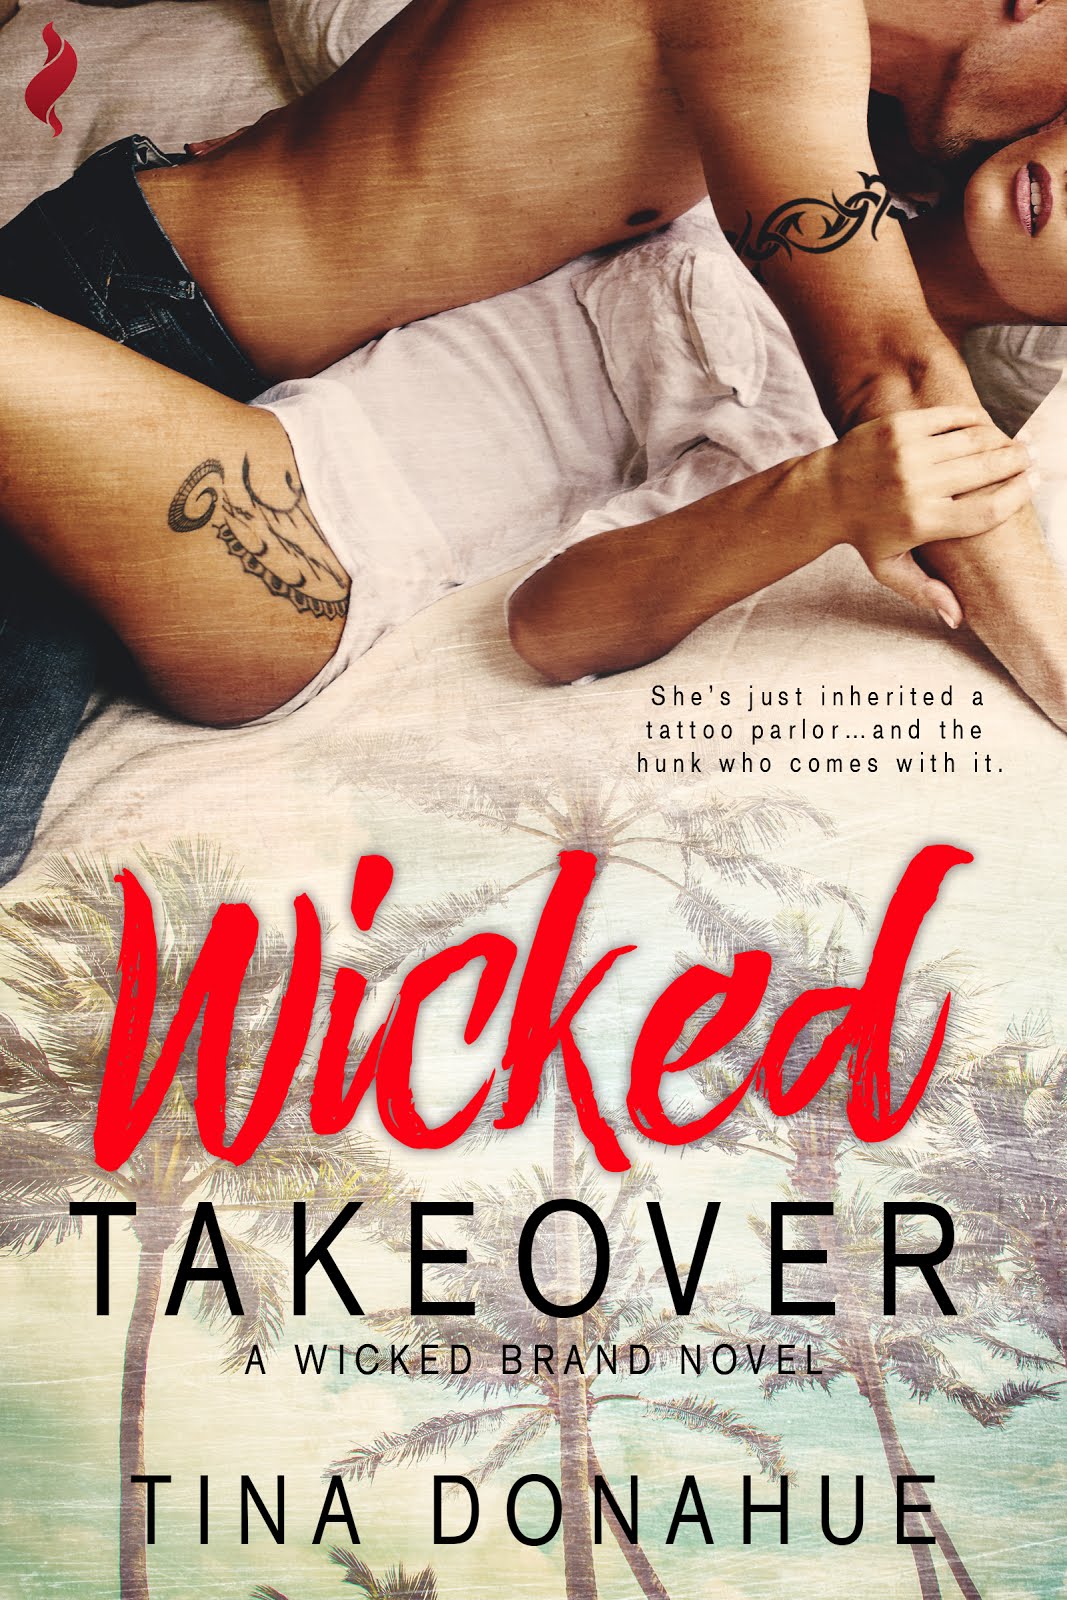 Wicked Takeover